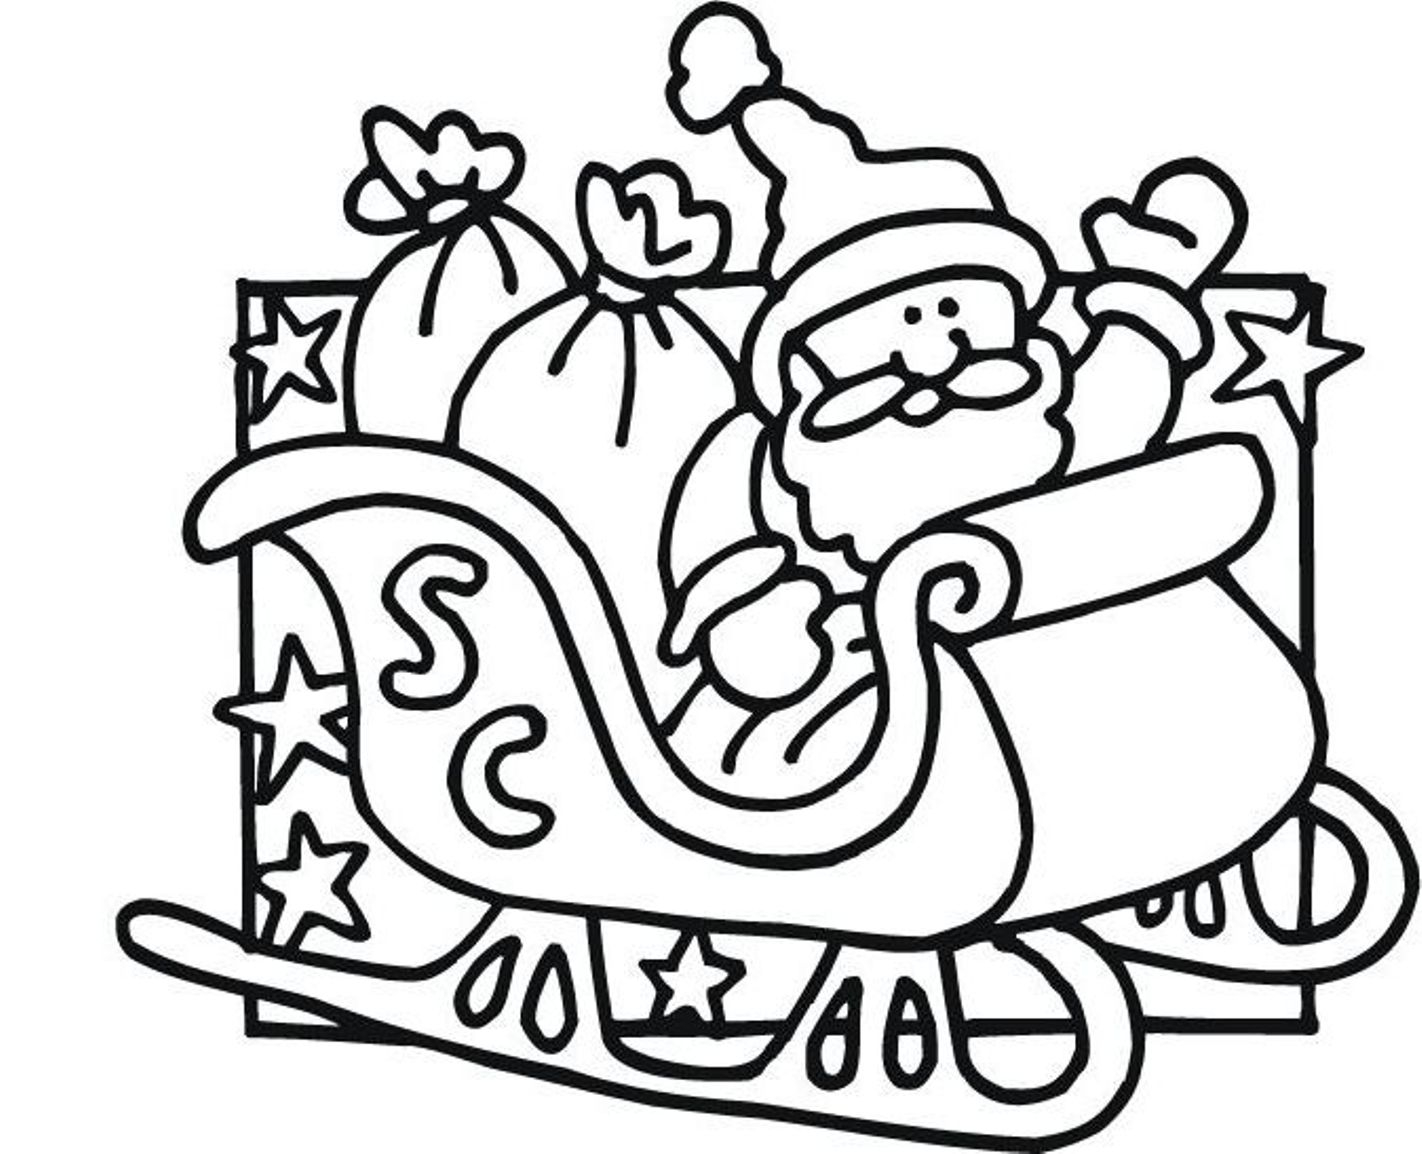 Children's Christmas Coloring Pages Free Santa Coloring Pages Free Download Best Santa Coloring Pages On